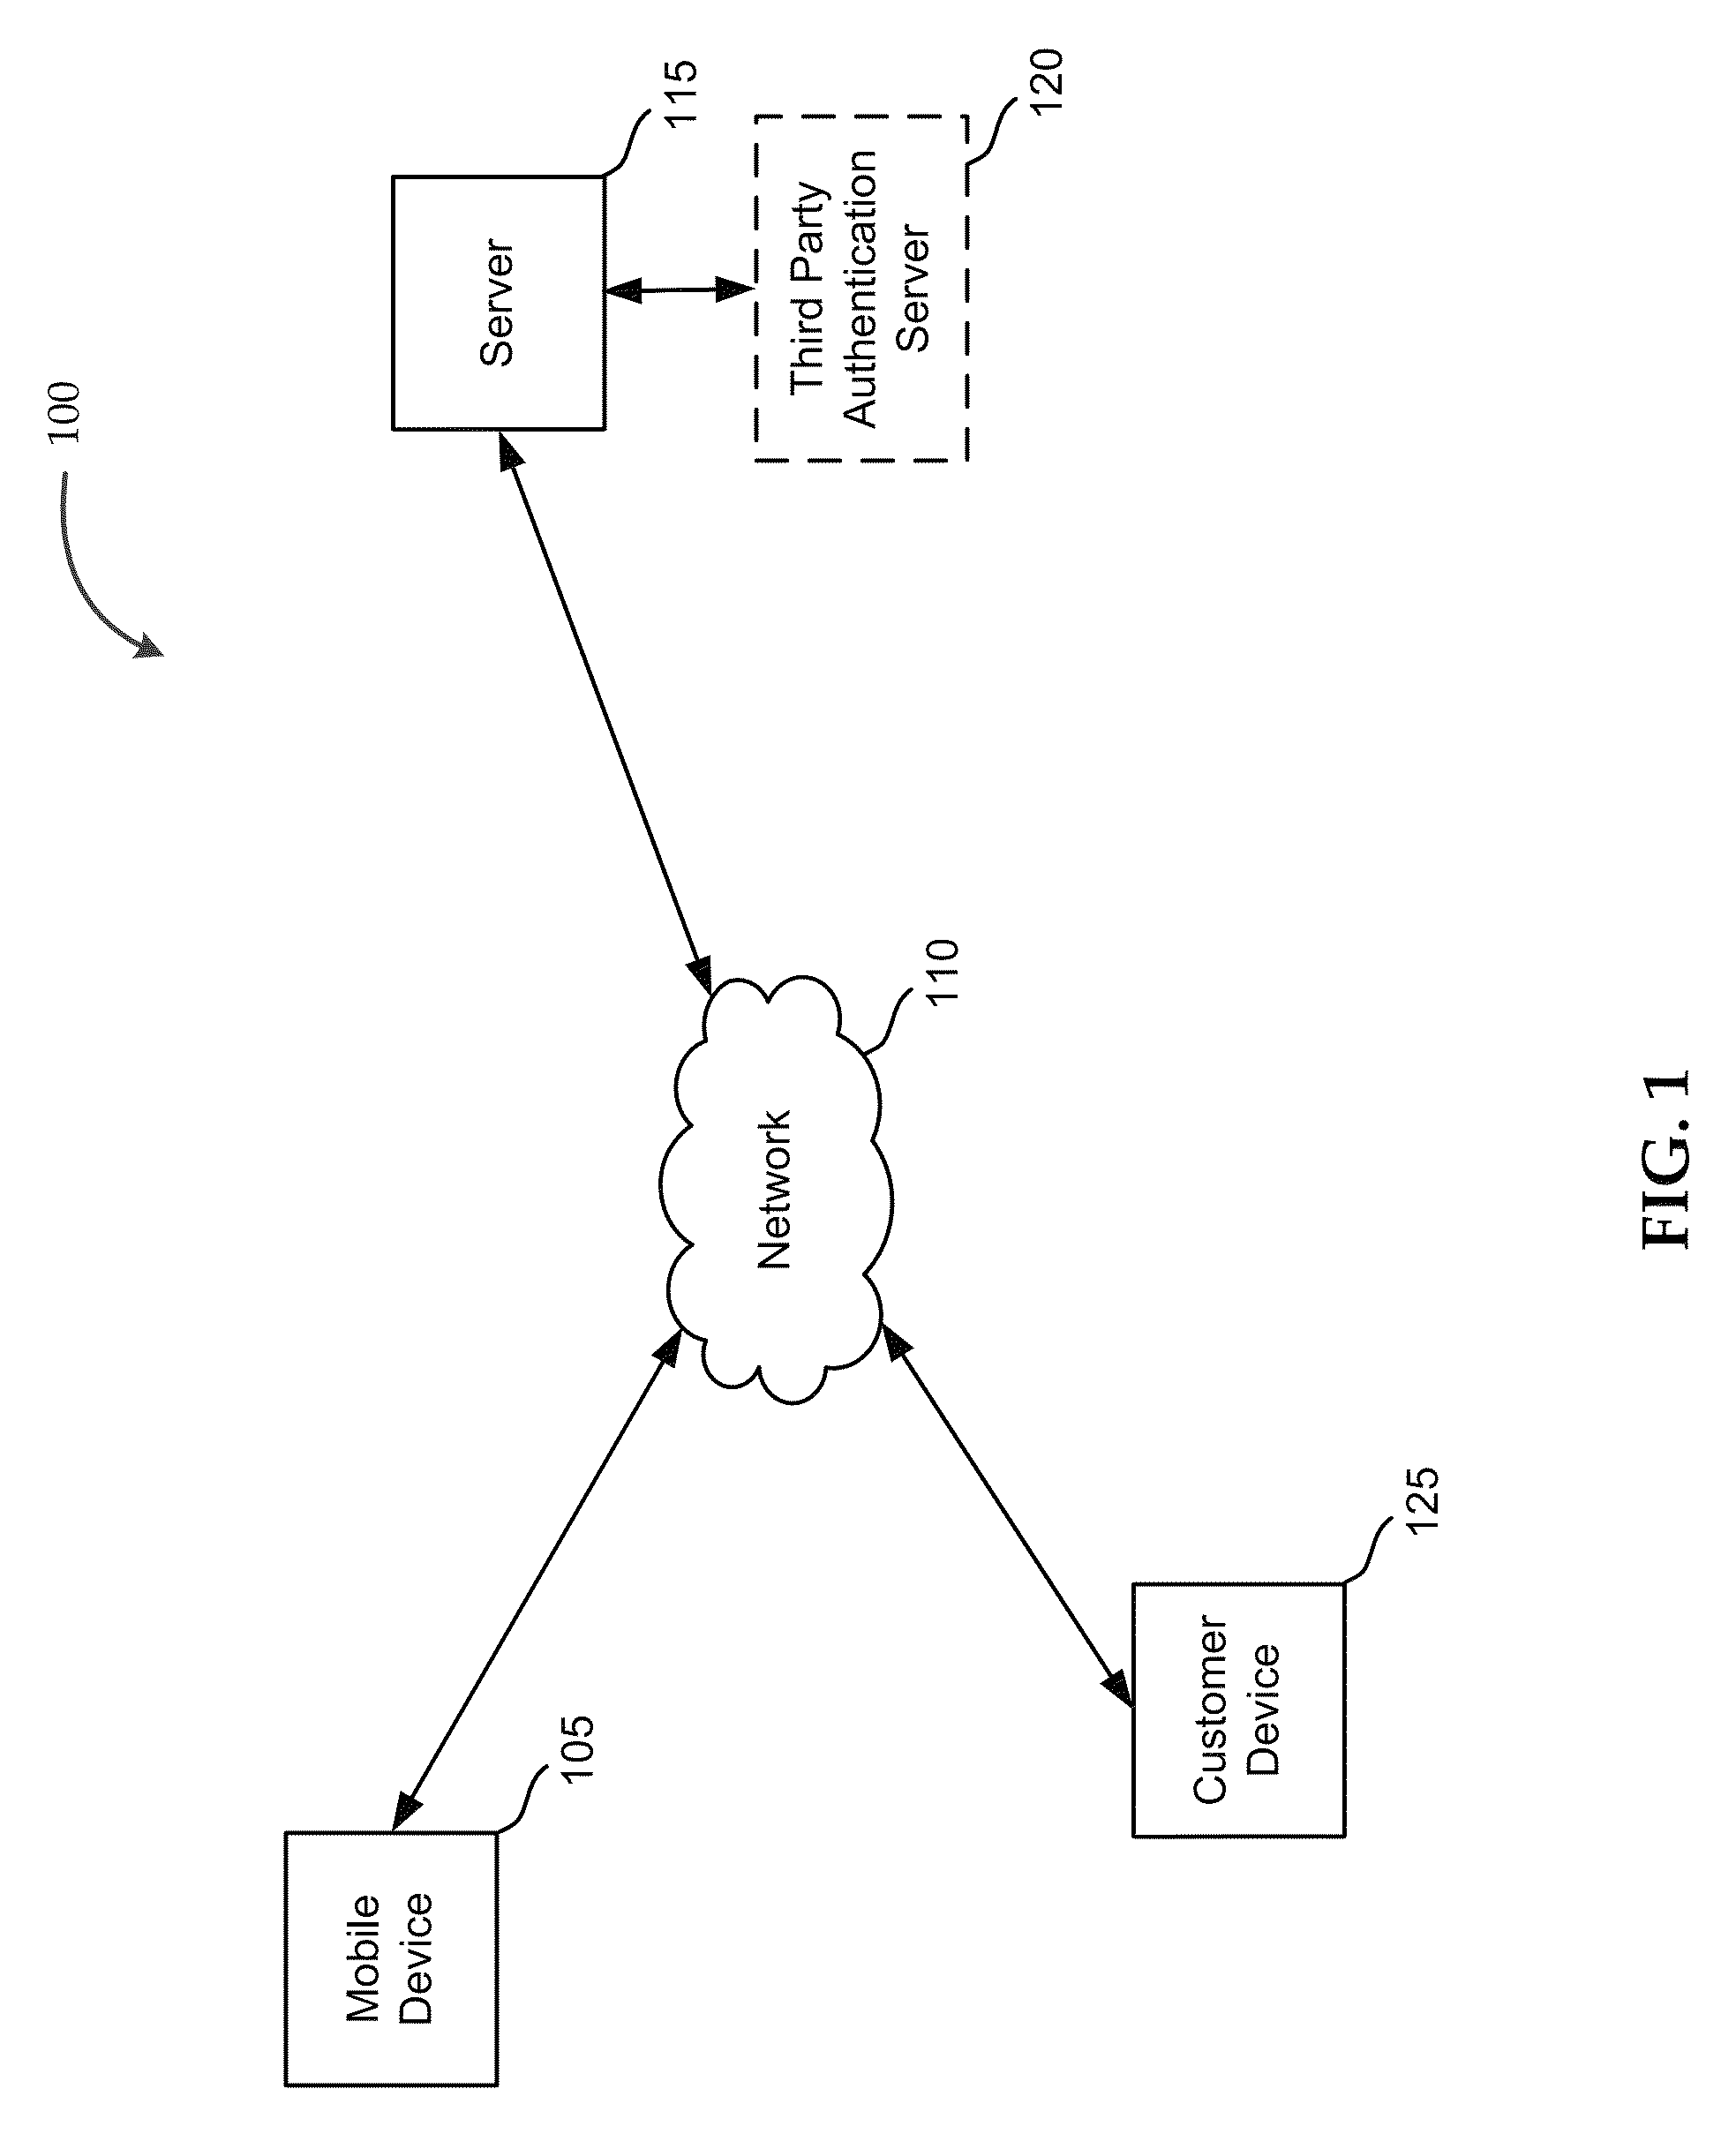 Method and system for replaying a voice message and displaying a signed digital photograph contemporaneously